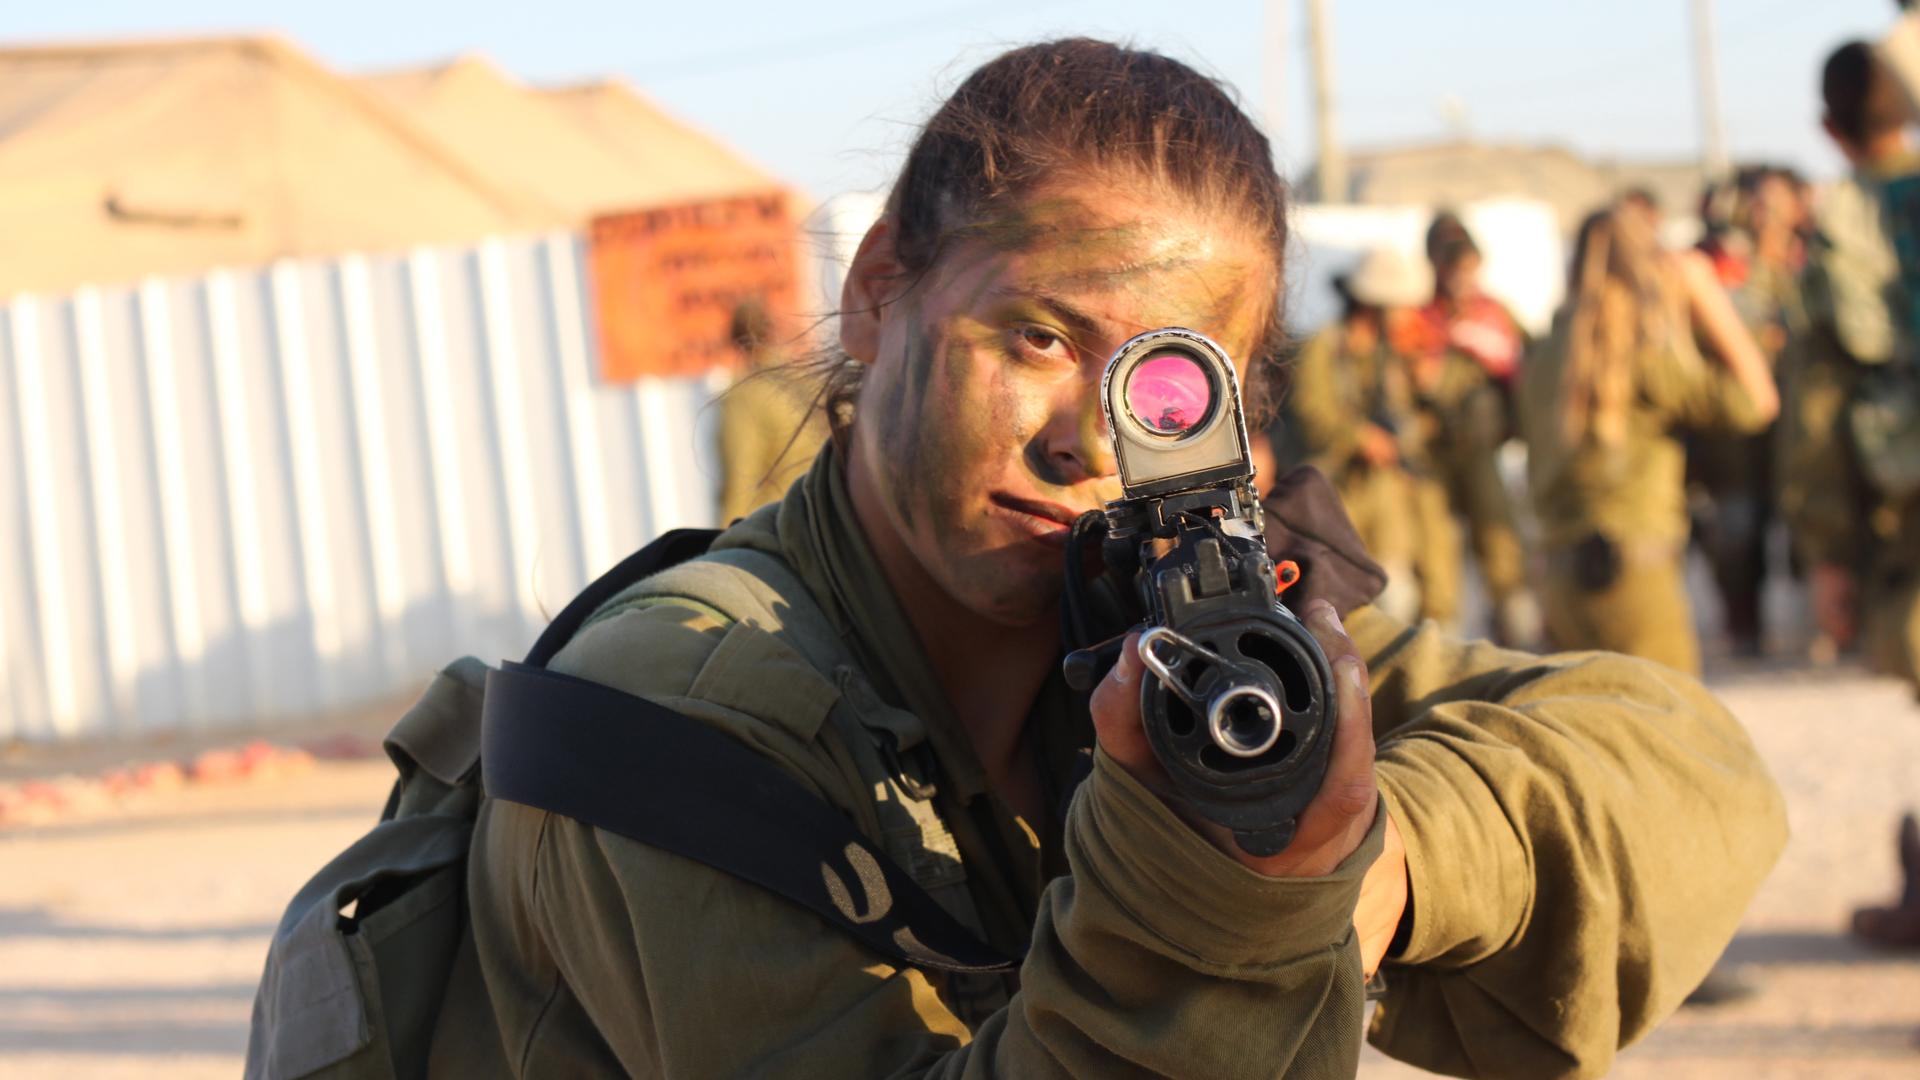 A female Israeli combat soldier poses for a photo.